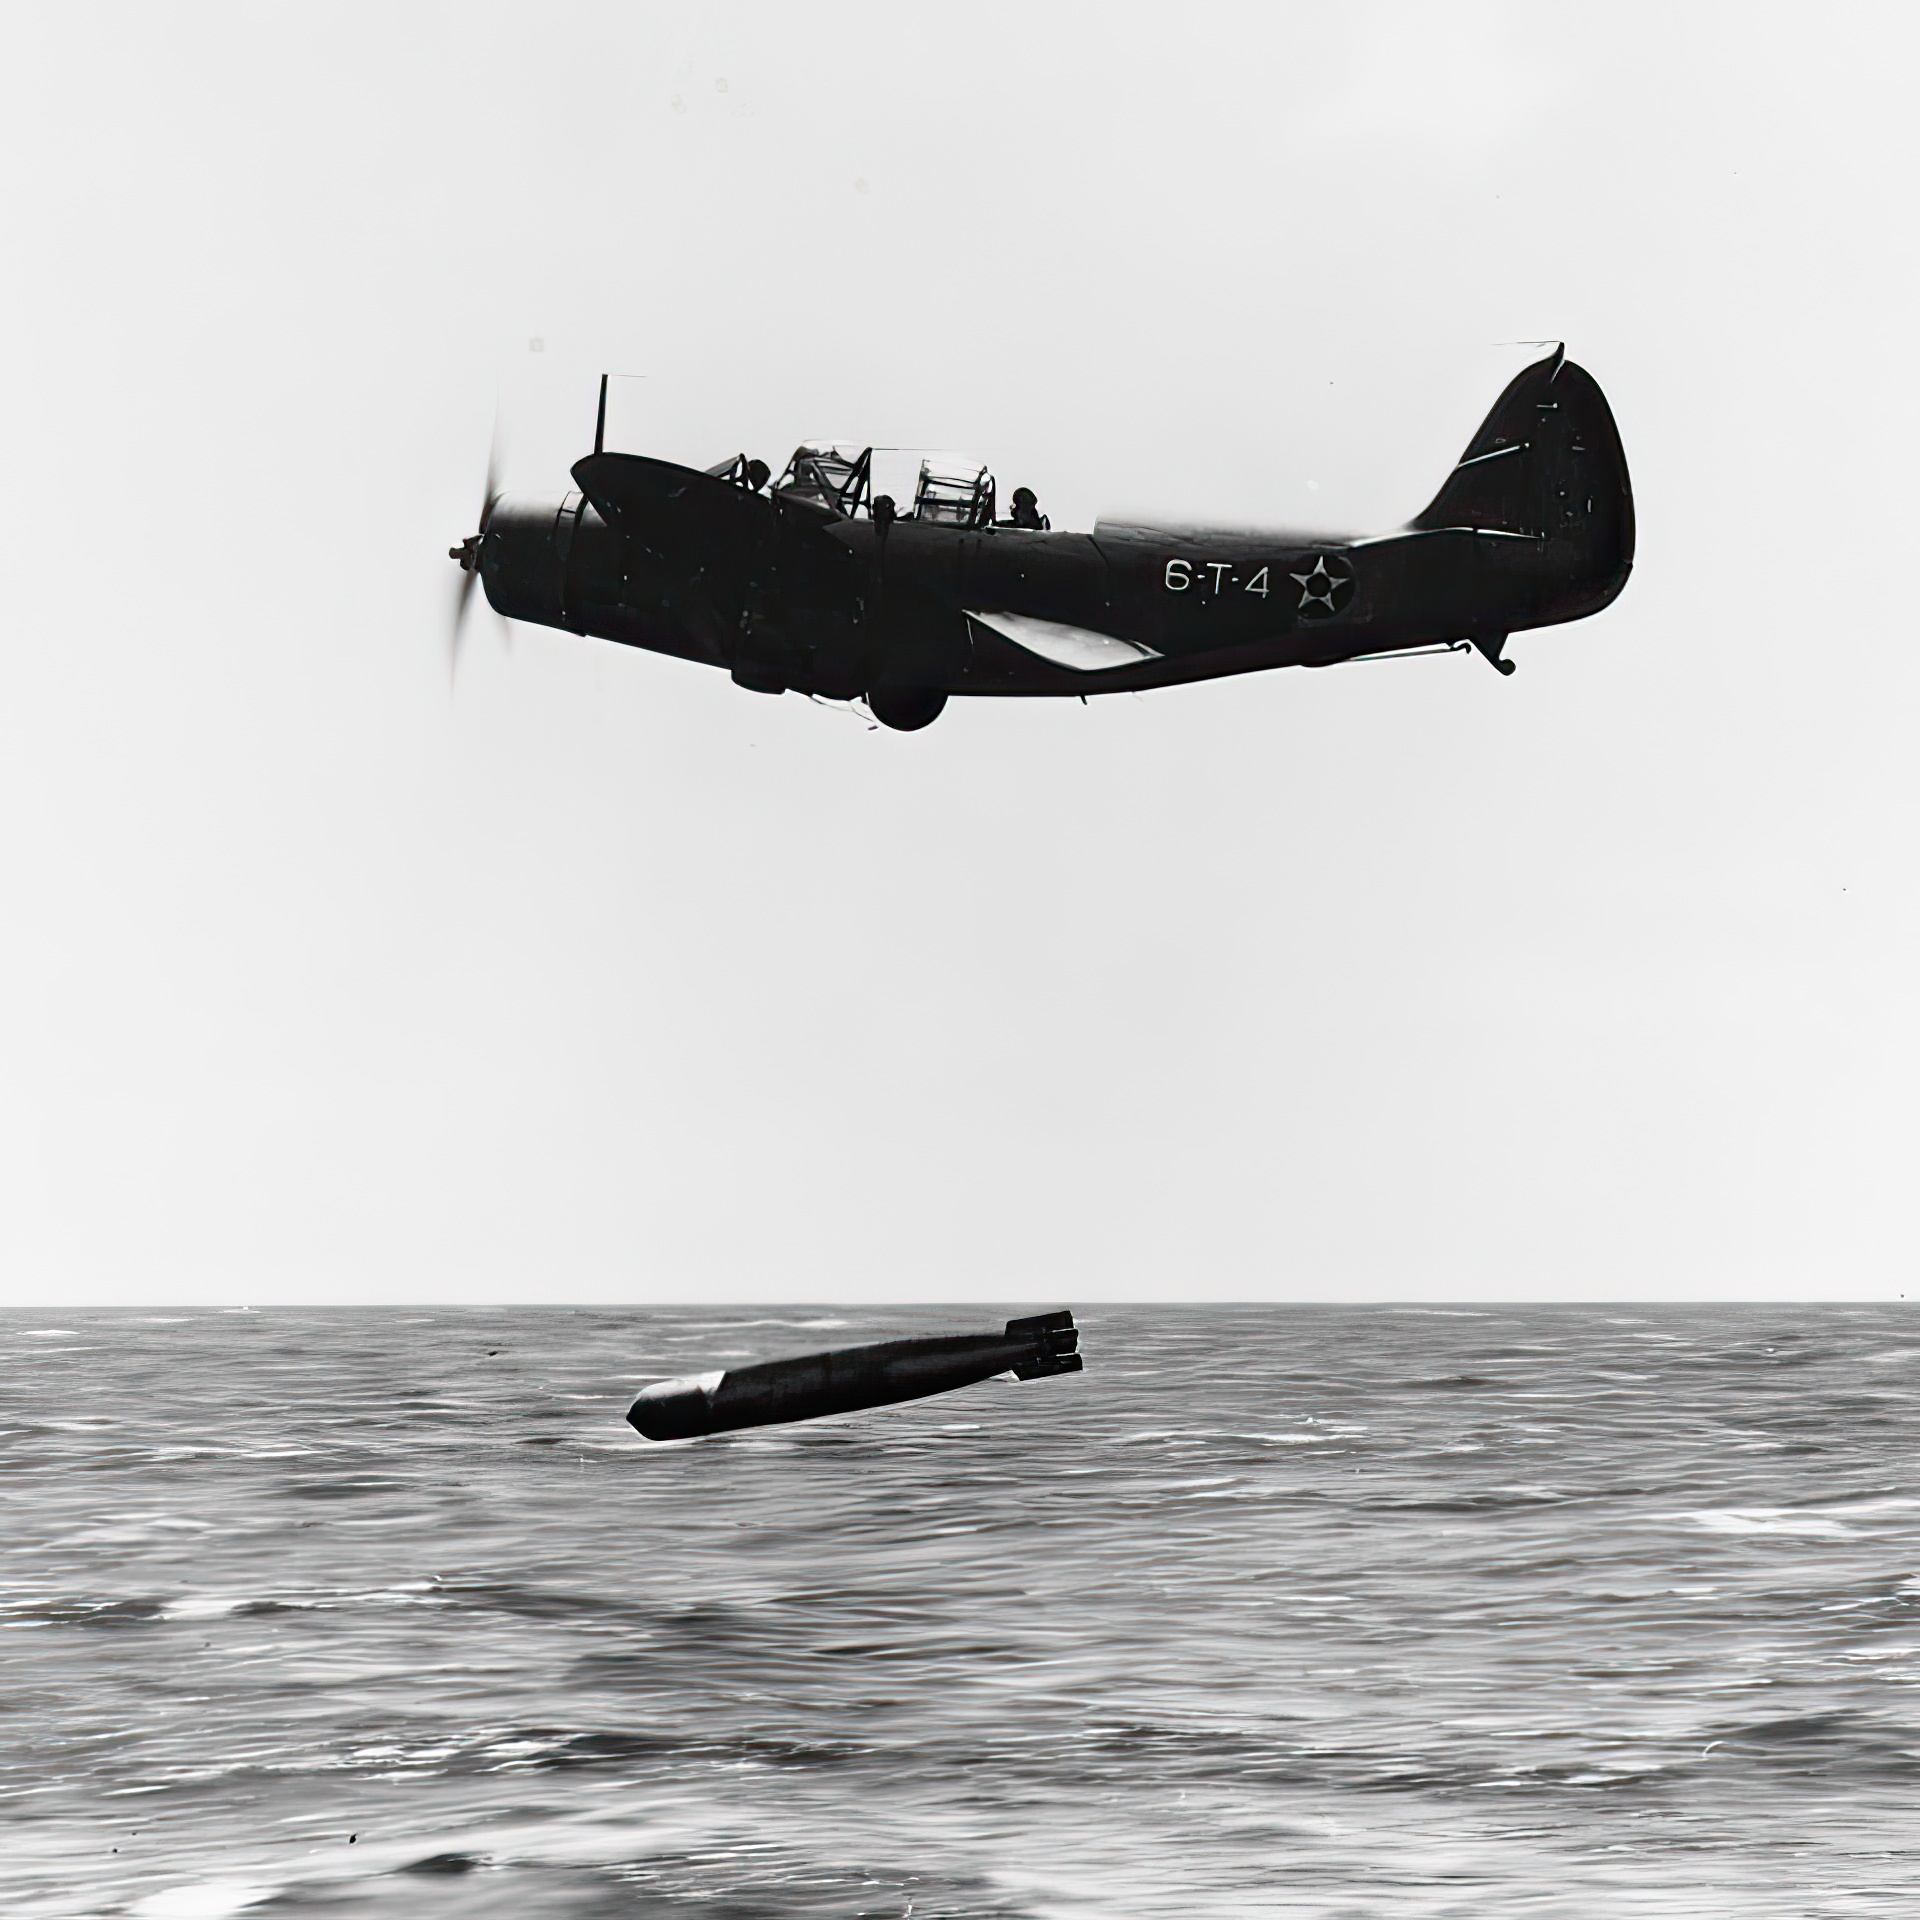 U.S. Navy Douglas TBD-1 Devastator (BuNo 0325, "6-T-4") of Torpedo Squadron 6 (VT-6) from the aircraft carrier USS Enterprise (CV-6) making a practice drop with a Mark 13 torpedo October 20 1941